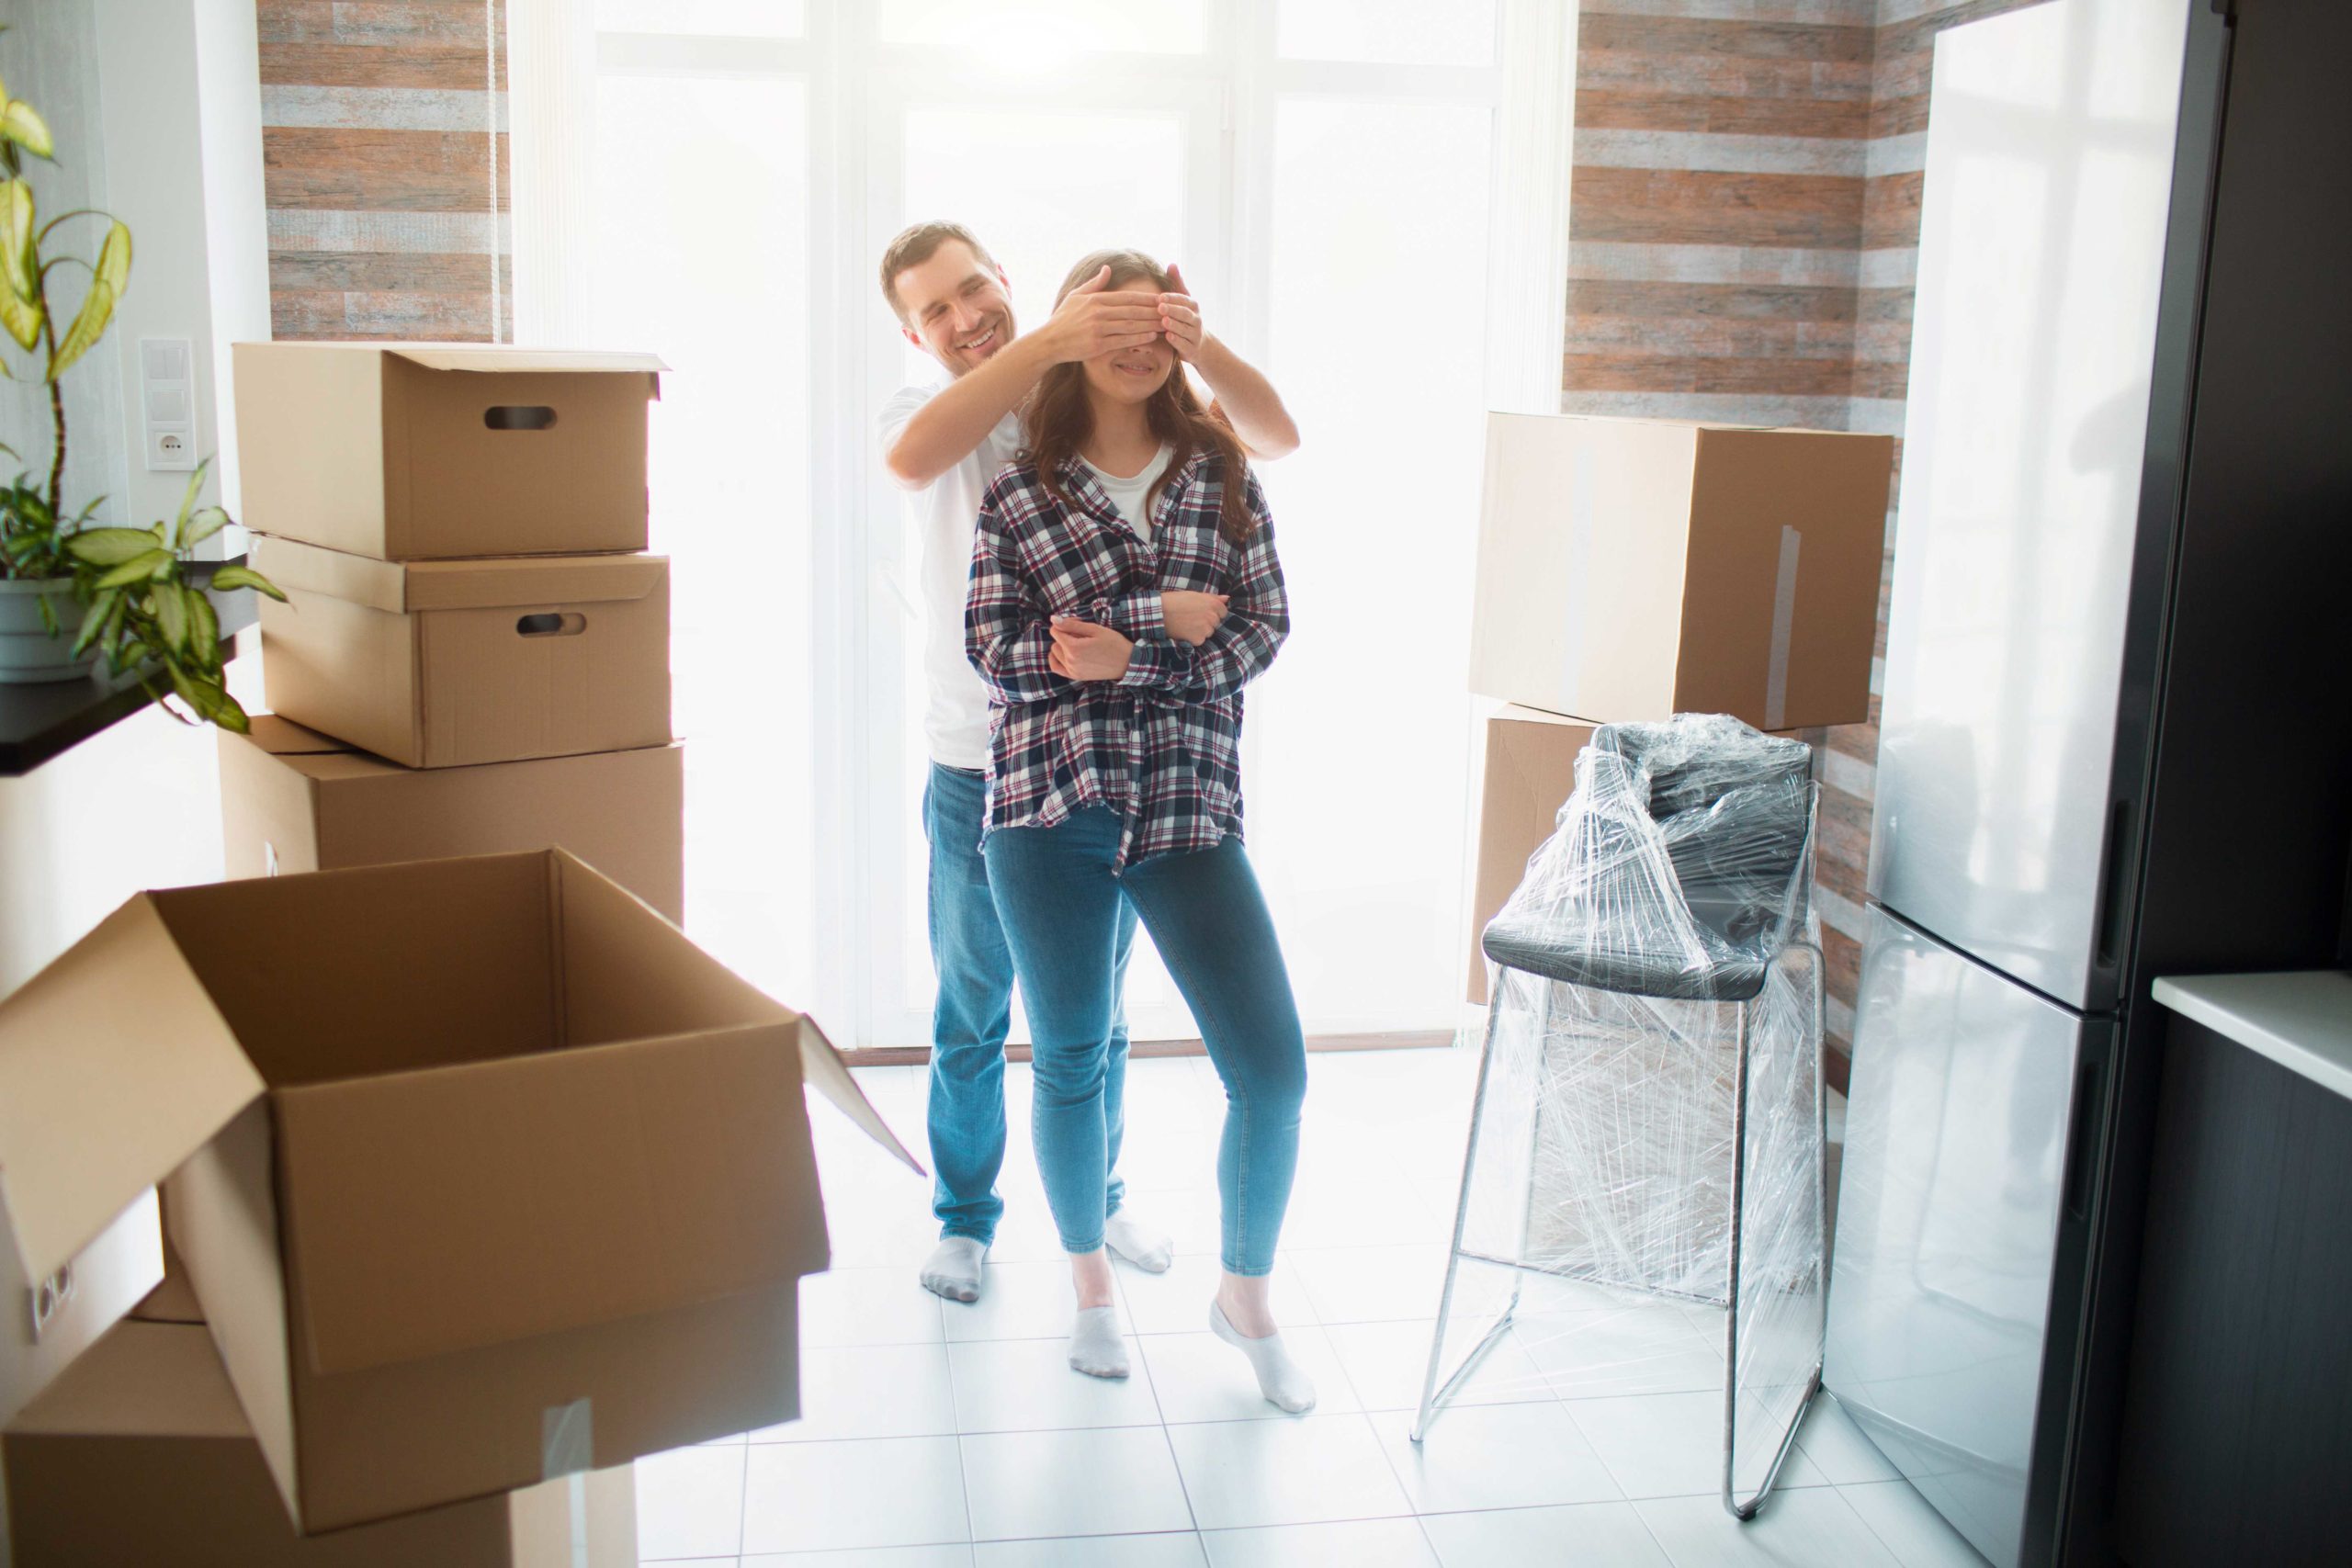 Man holding his hands over eyes on partner as they move into a new home